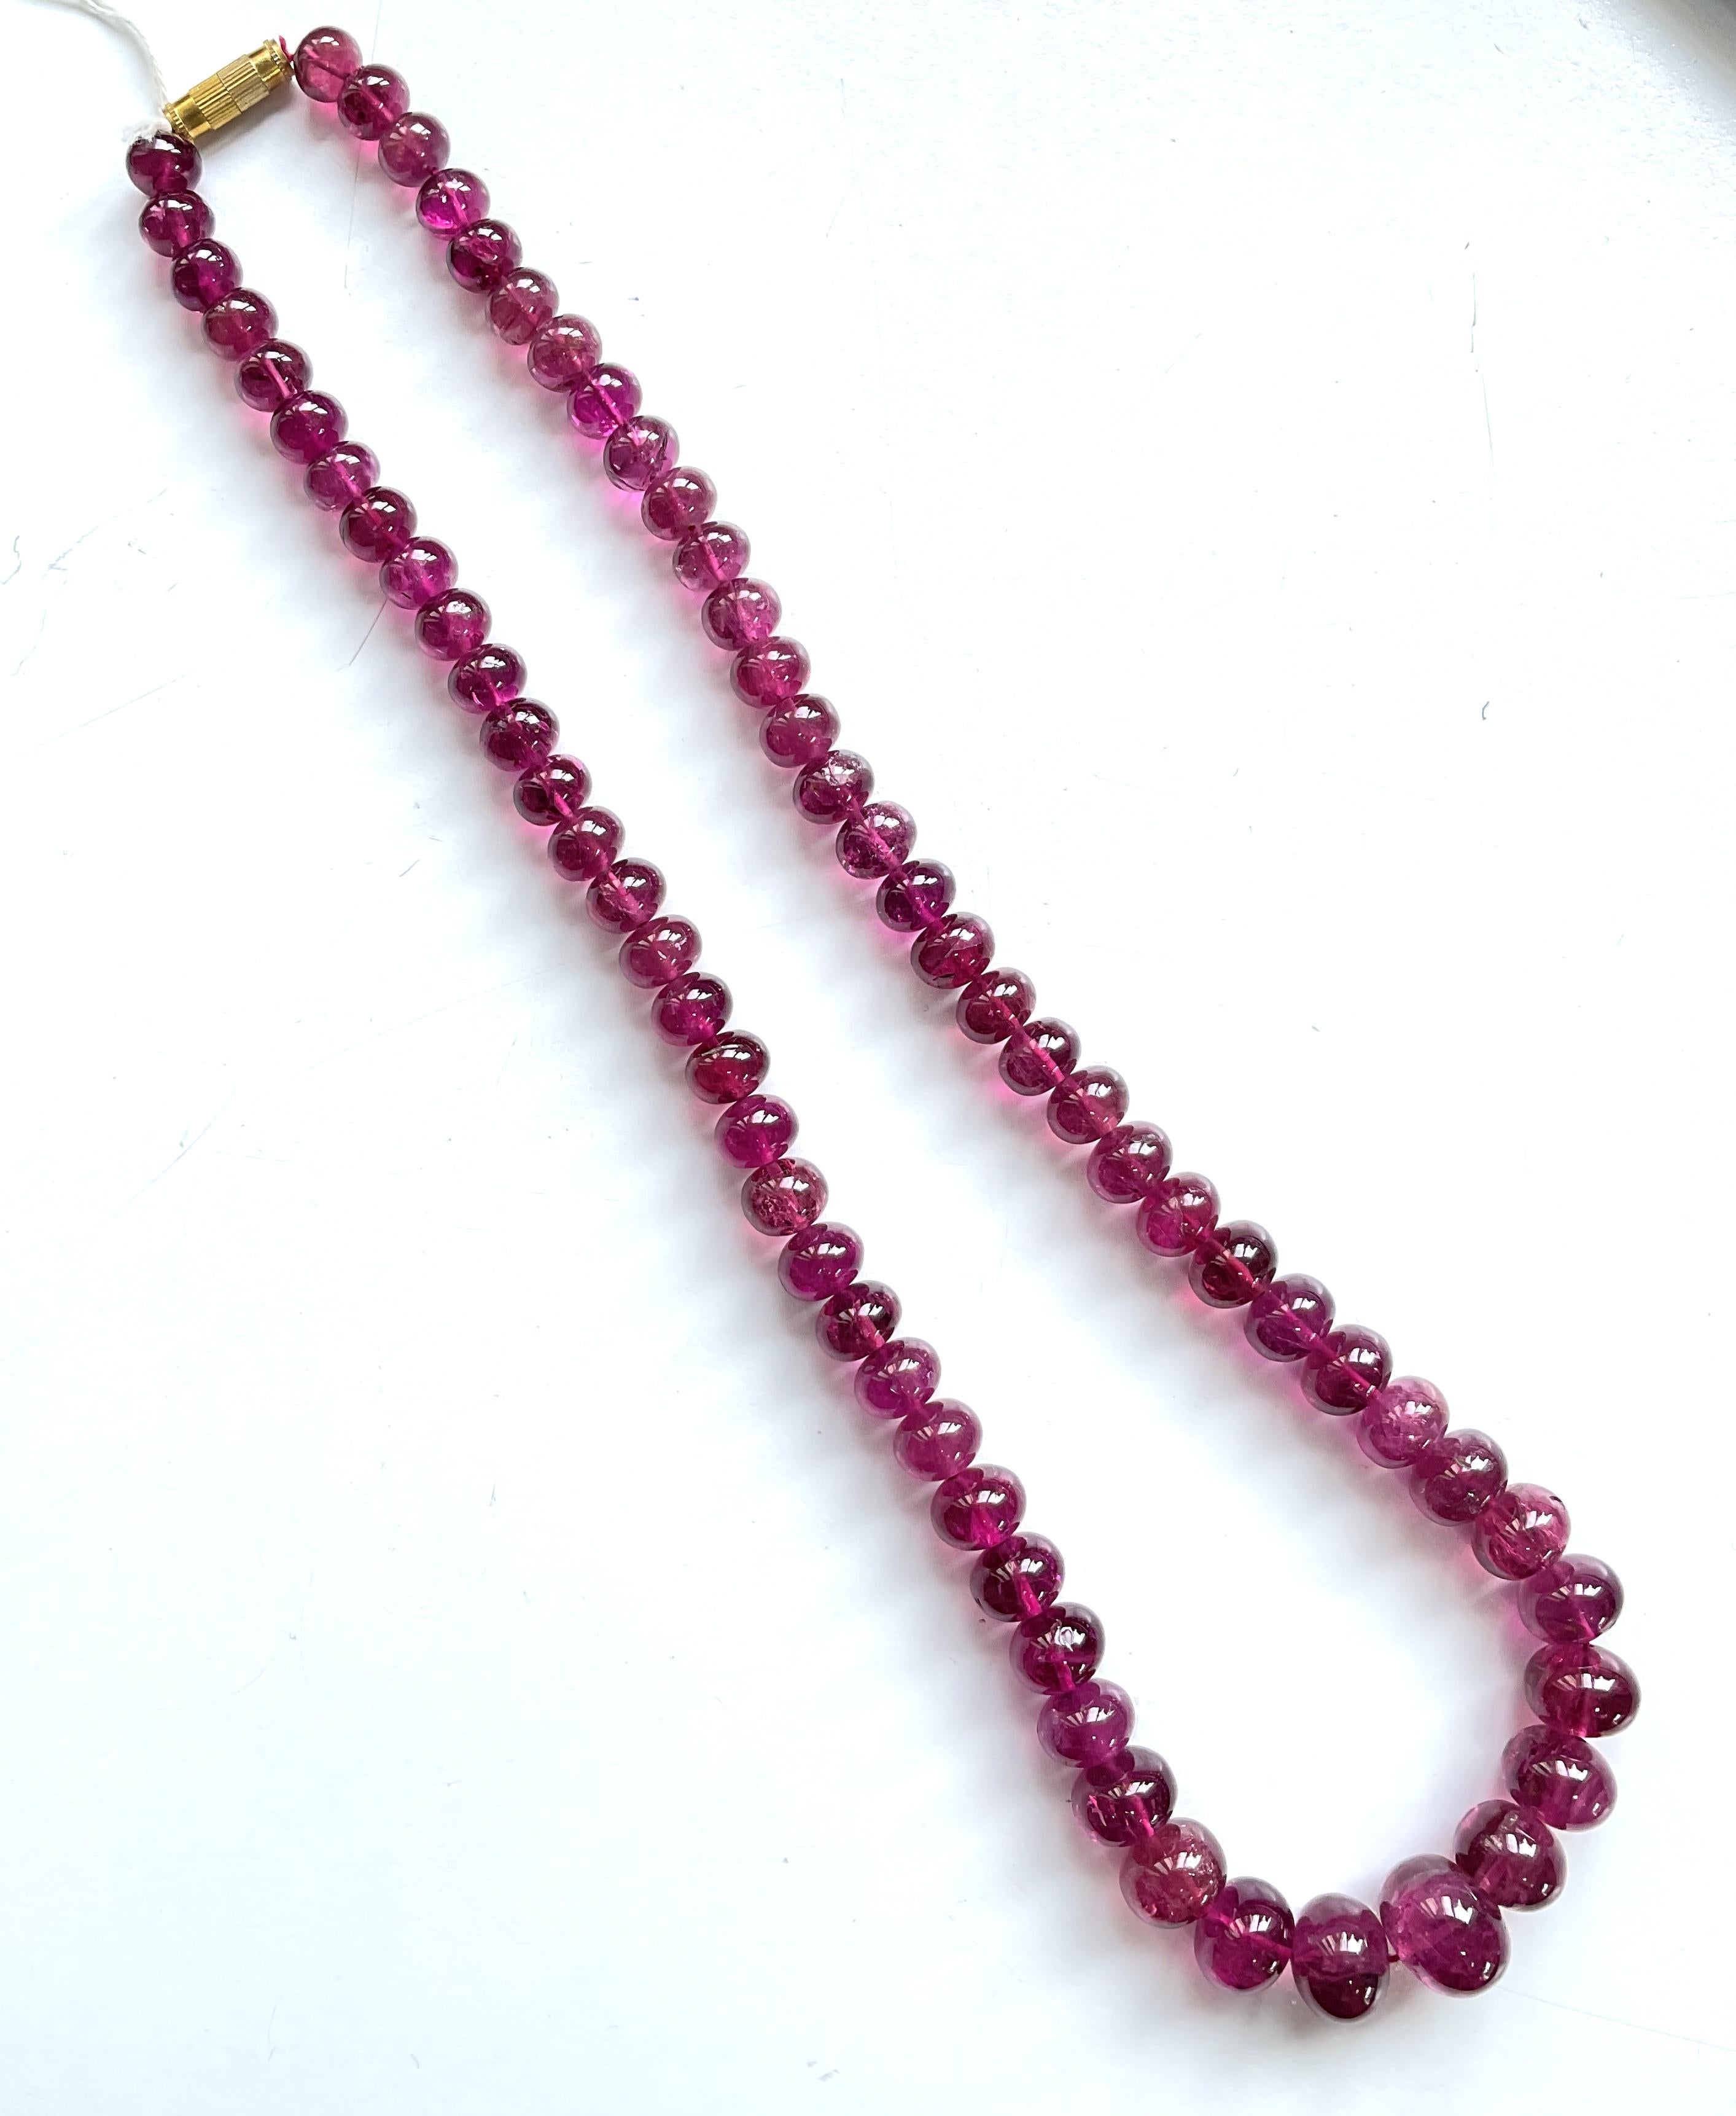 Rubellite Tourmaline Plain Beads For Top Fine Jewelry Natural Gem
Gemstone - Rubellite Tourmaline
Weight -  335.00 Carats
Strand - 1
Size - 8 To 14 MM
Shape - Beads

